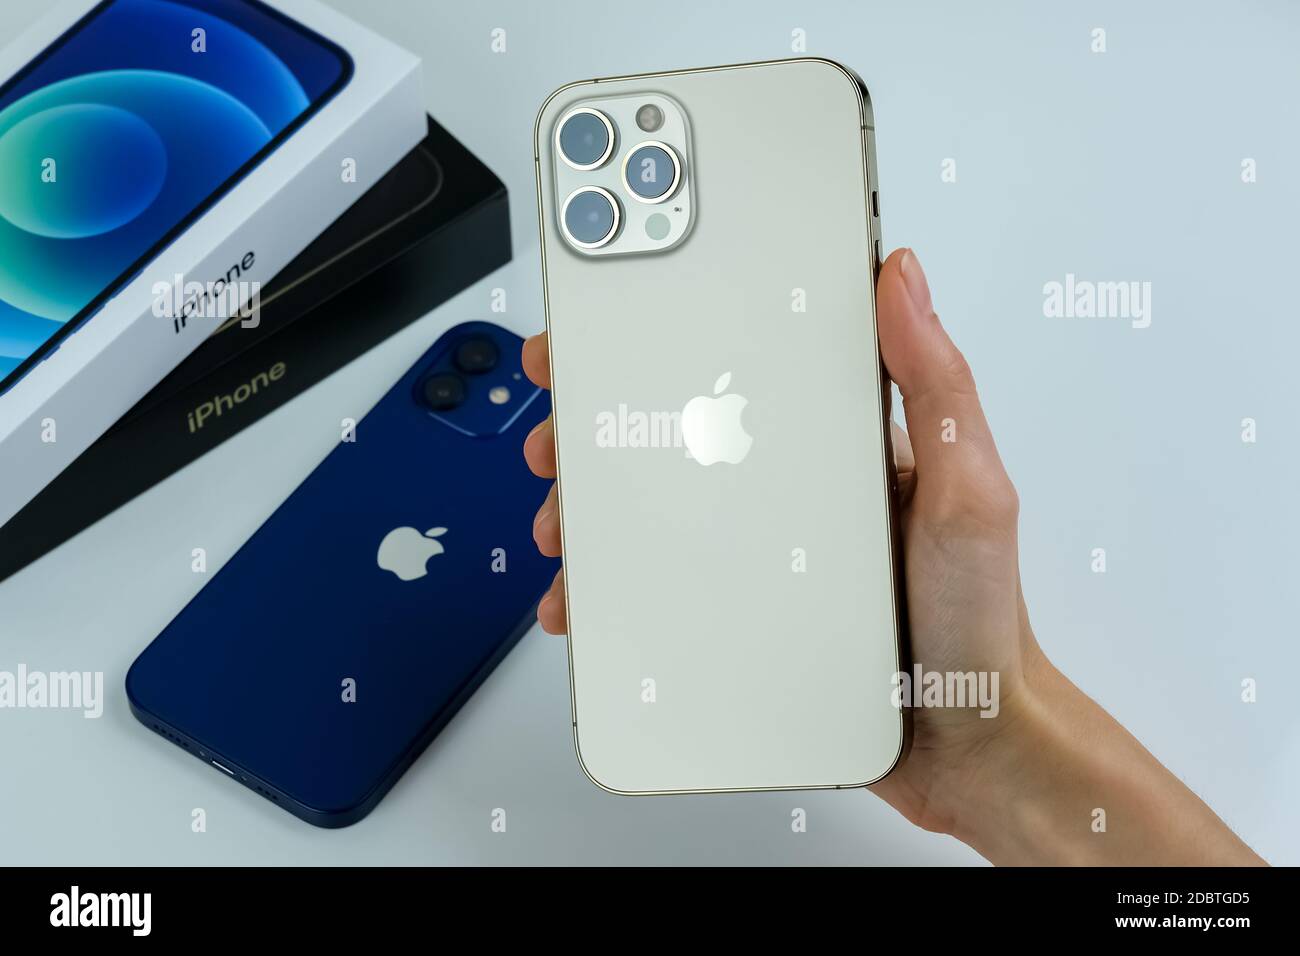 Iphone 12 Pro Max In Gold Next To Iphone 12 In Blue On A White Desk Stock Photo Alamy